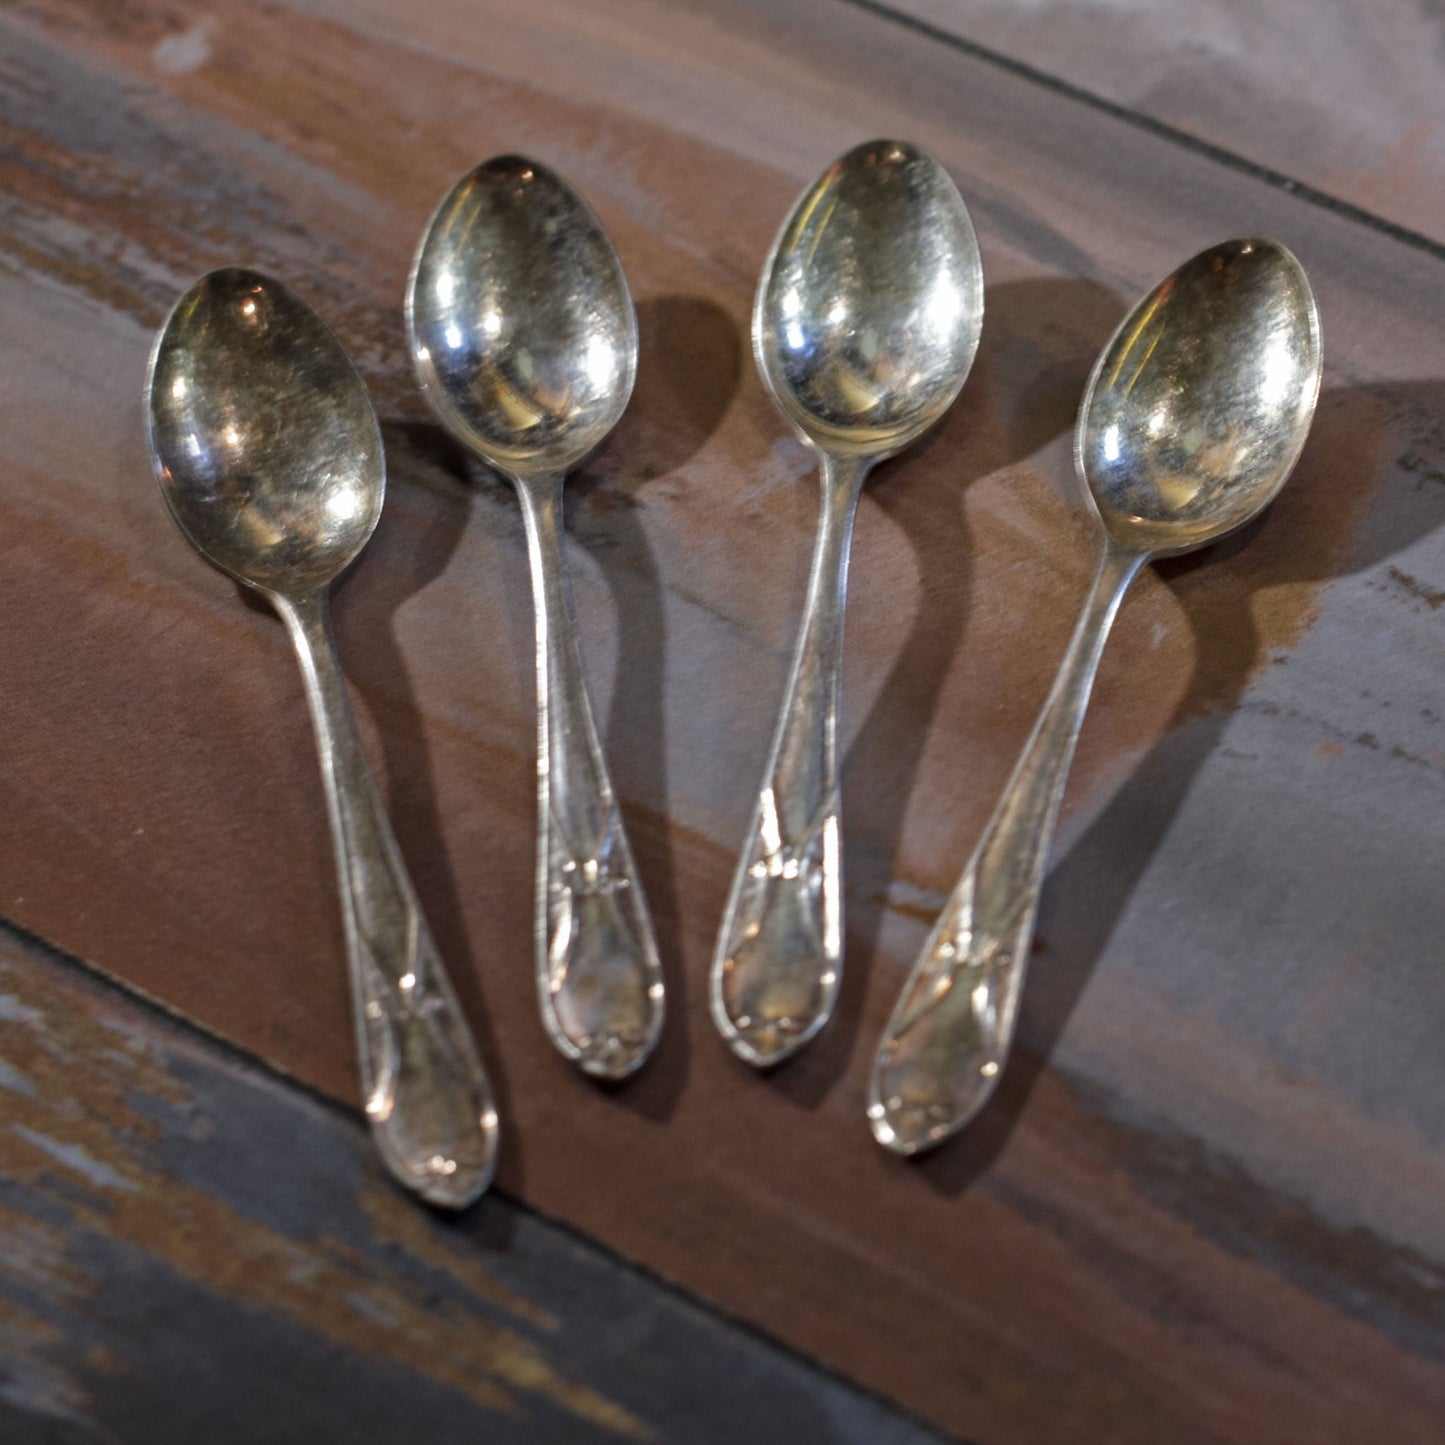 SHEFFIELD CRAFTSMAN SILVER PLATE DEMITASSE SPOONS Set of Four (4)